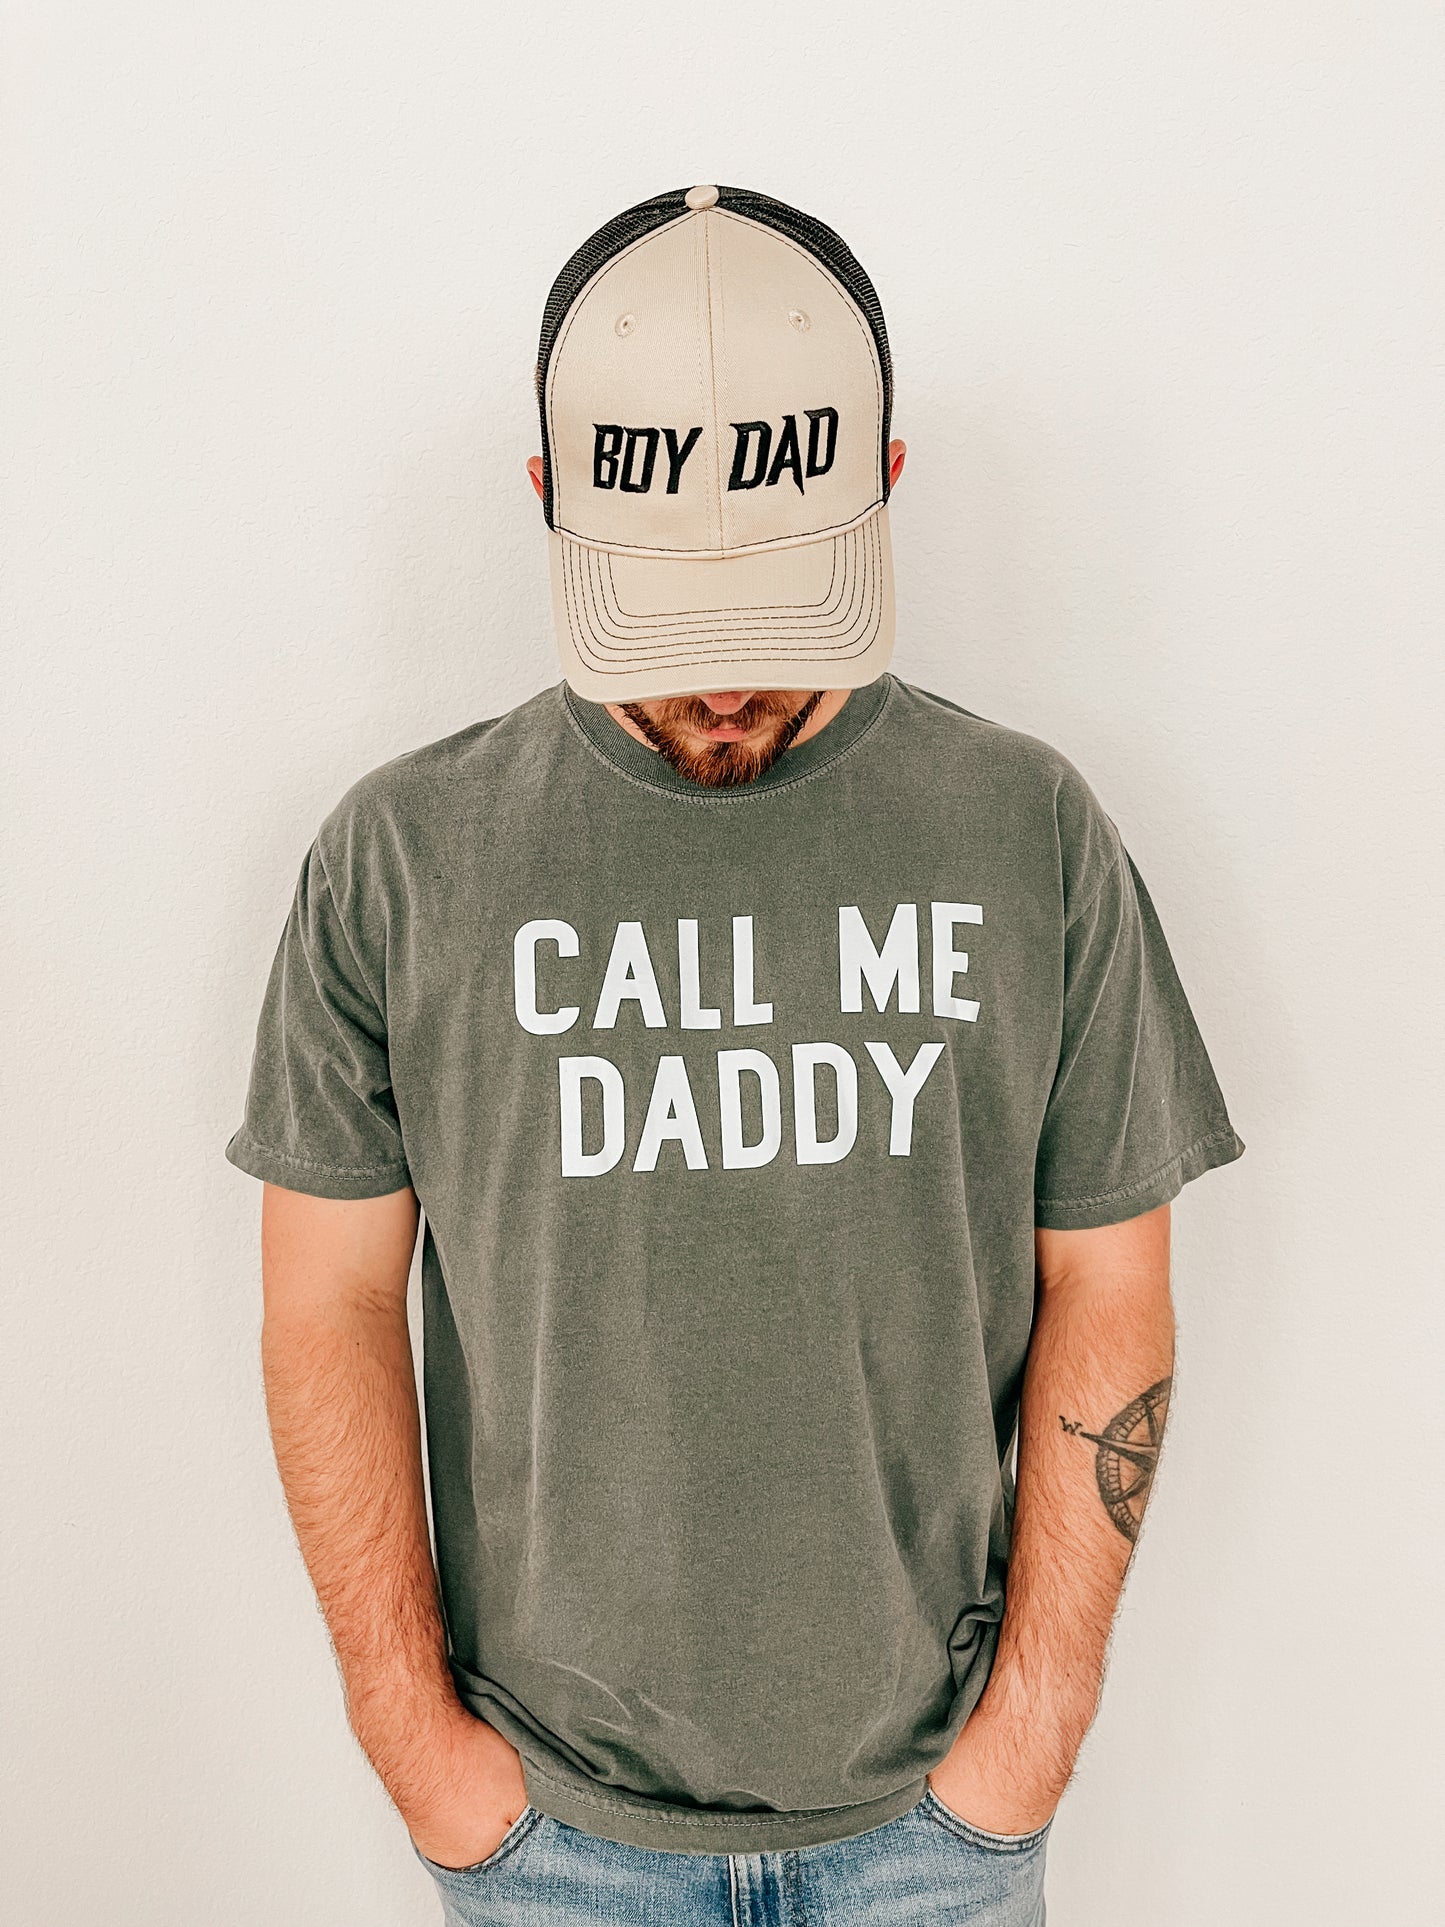 Call Me Daddy (White) - Tee (Spruce)